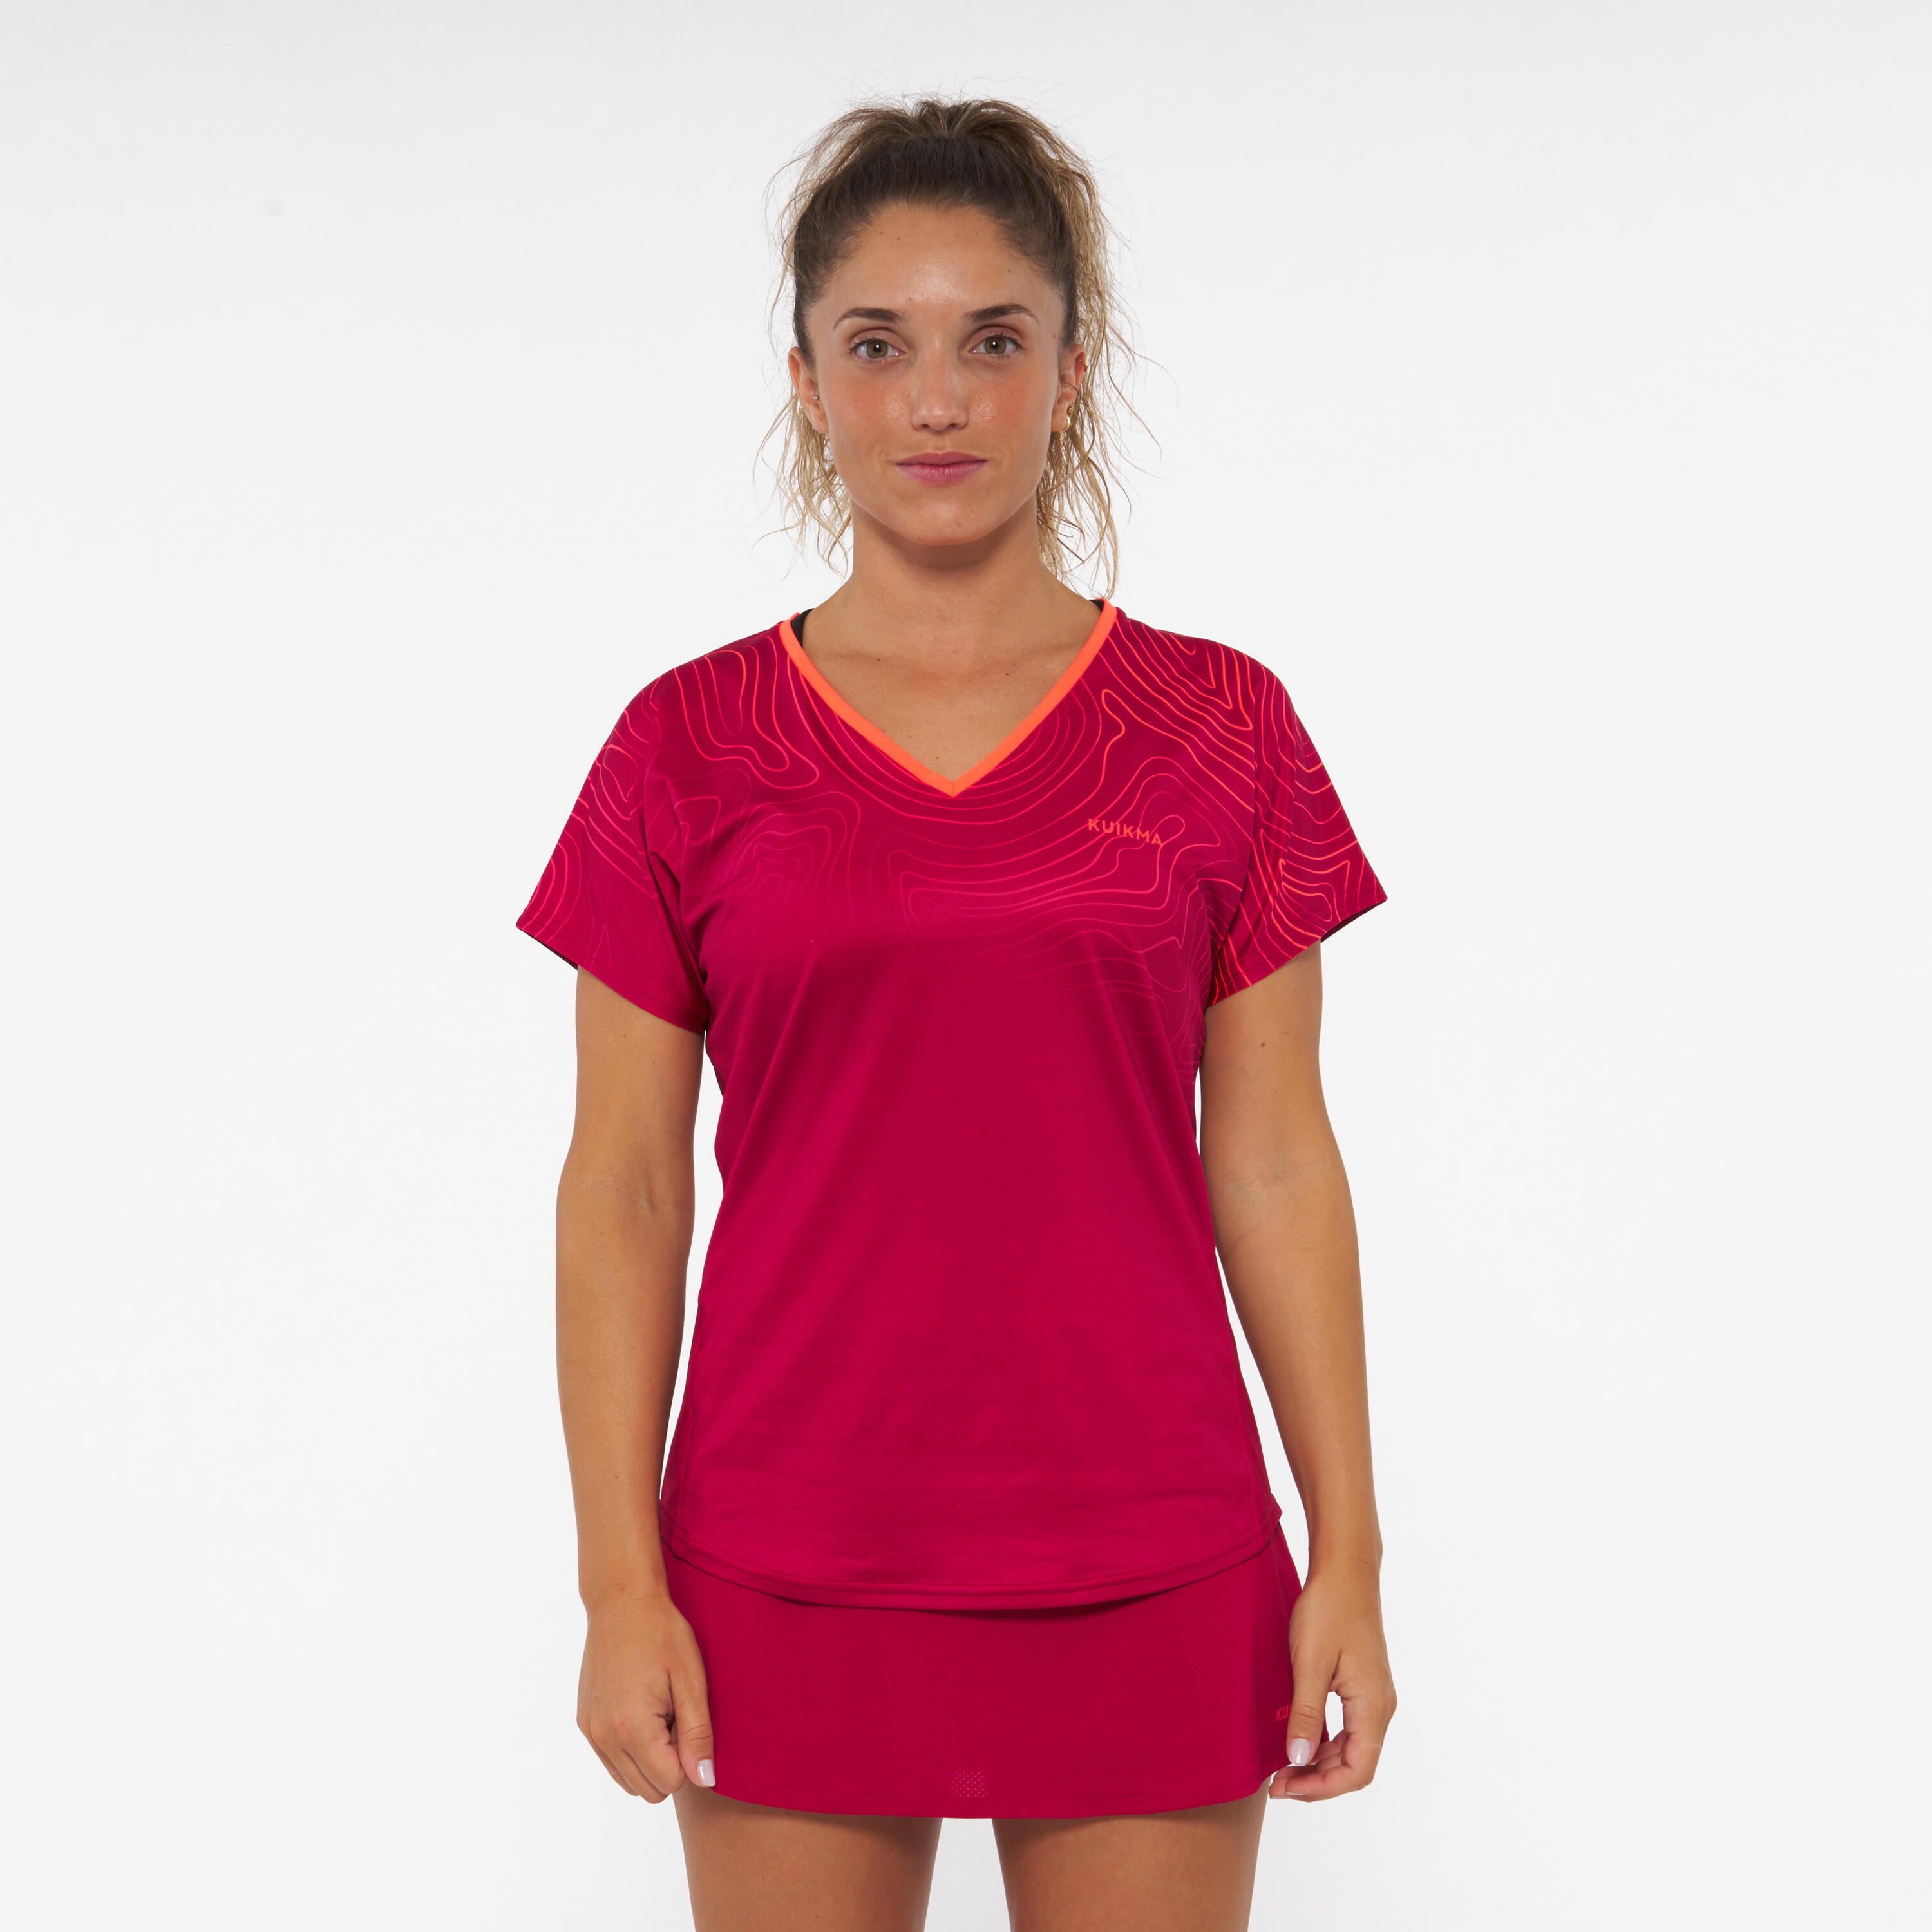 Women's Breathable Short-Sleeved Padel T-Shirt 500 - Red 1/7